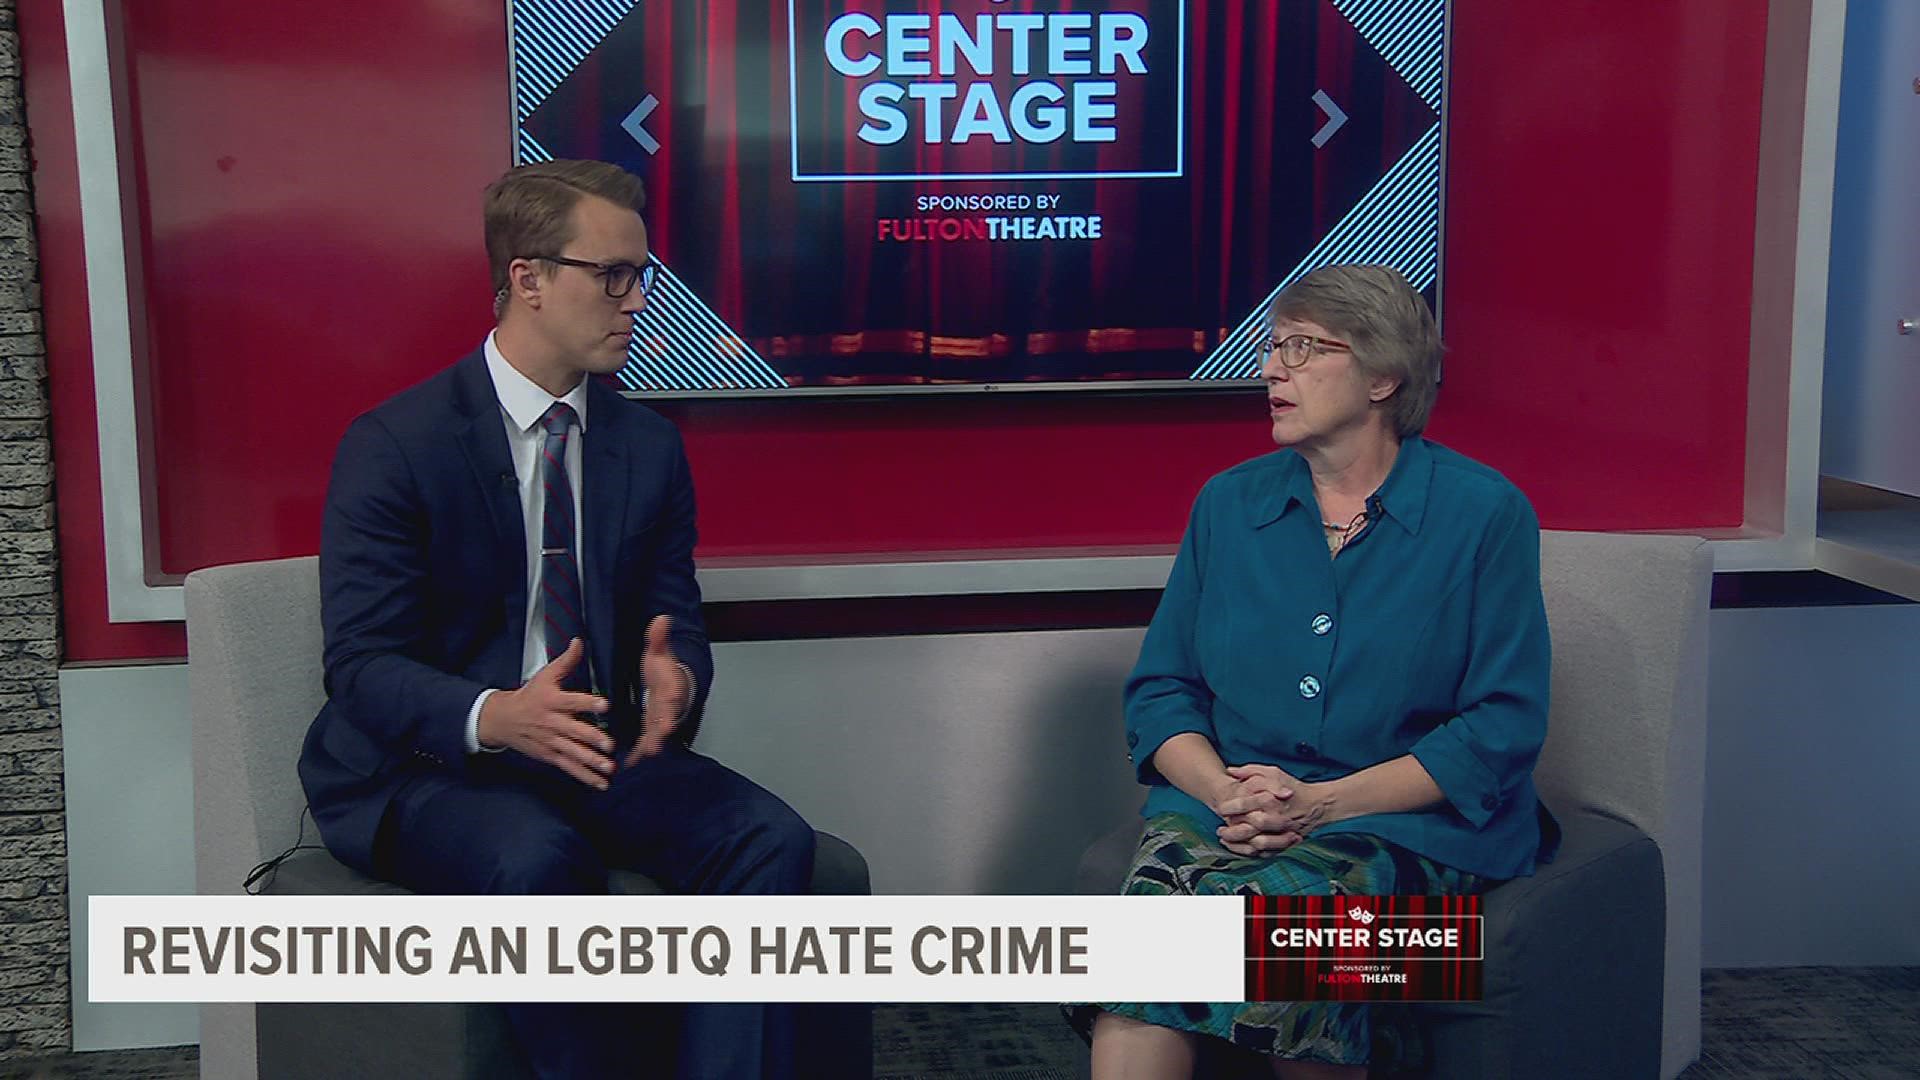 Director of "The Laramie Project" Lois Heagy sat down with FOX43 to talk more about the play and Oyster Mill Playhouse's upcoming shows.